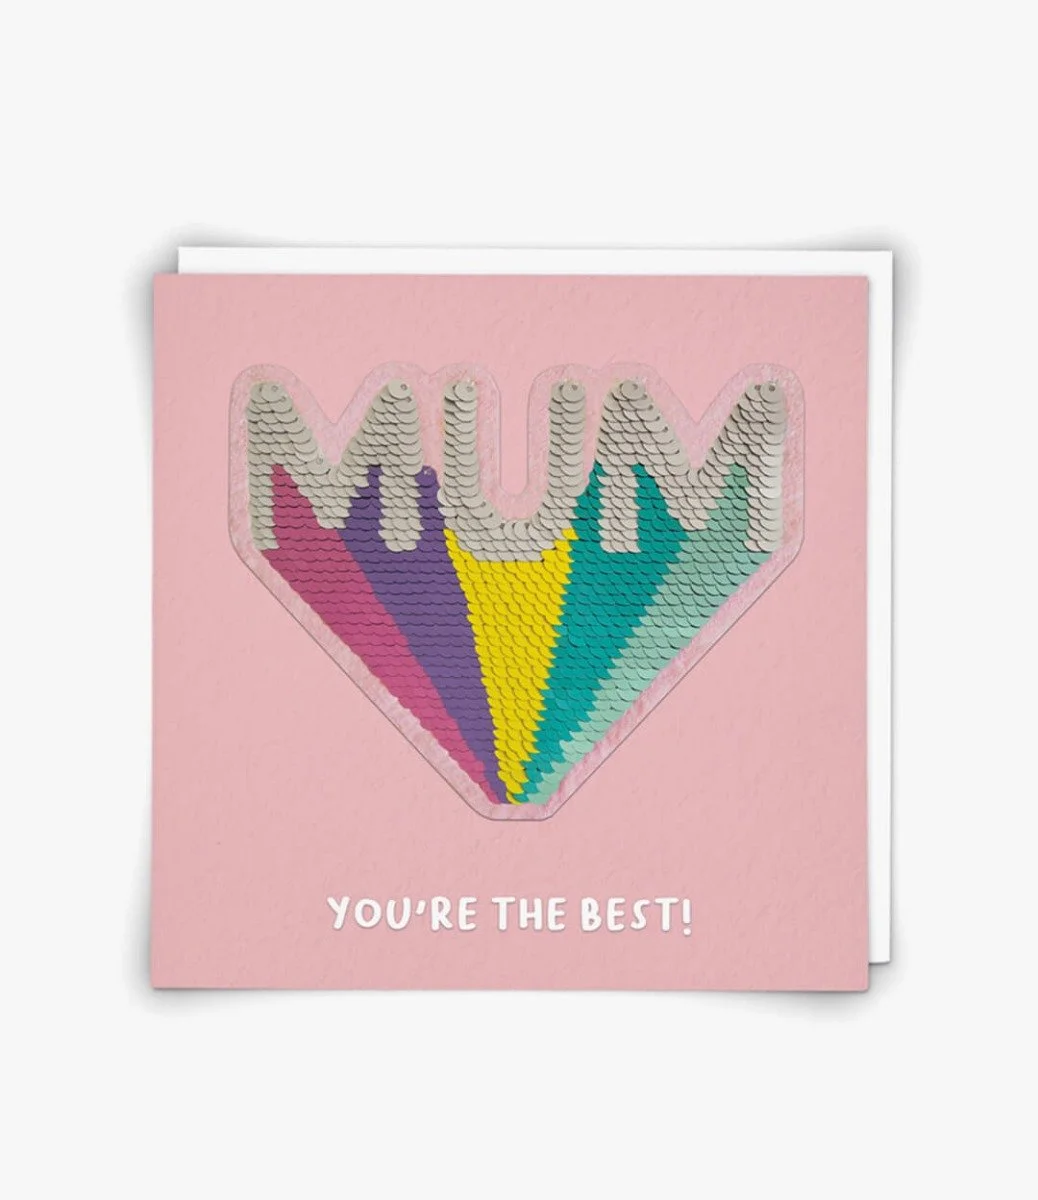 "Sequin Mum" Contemporary Greeting Card by Redback